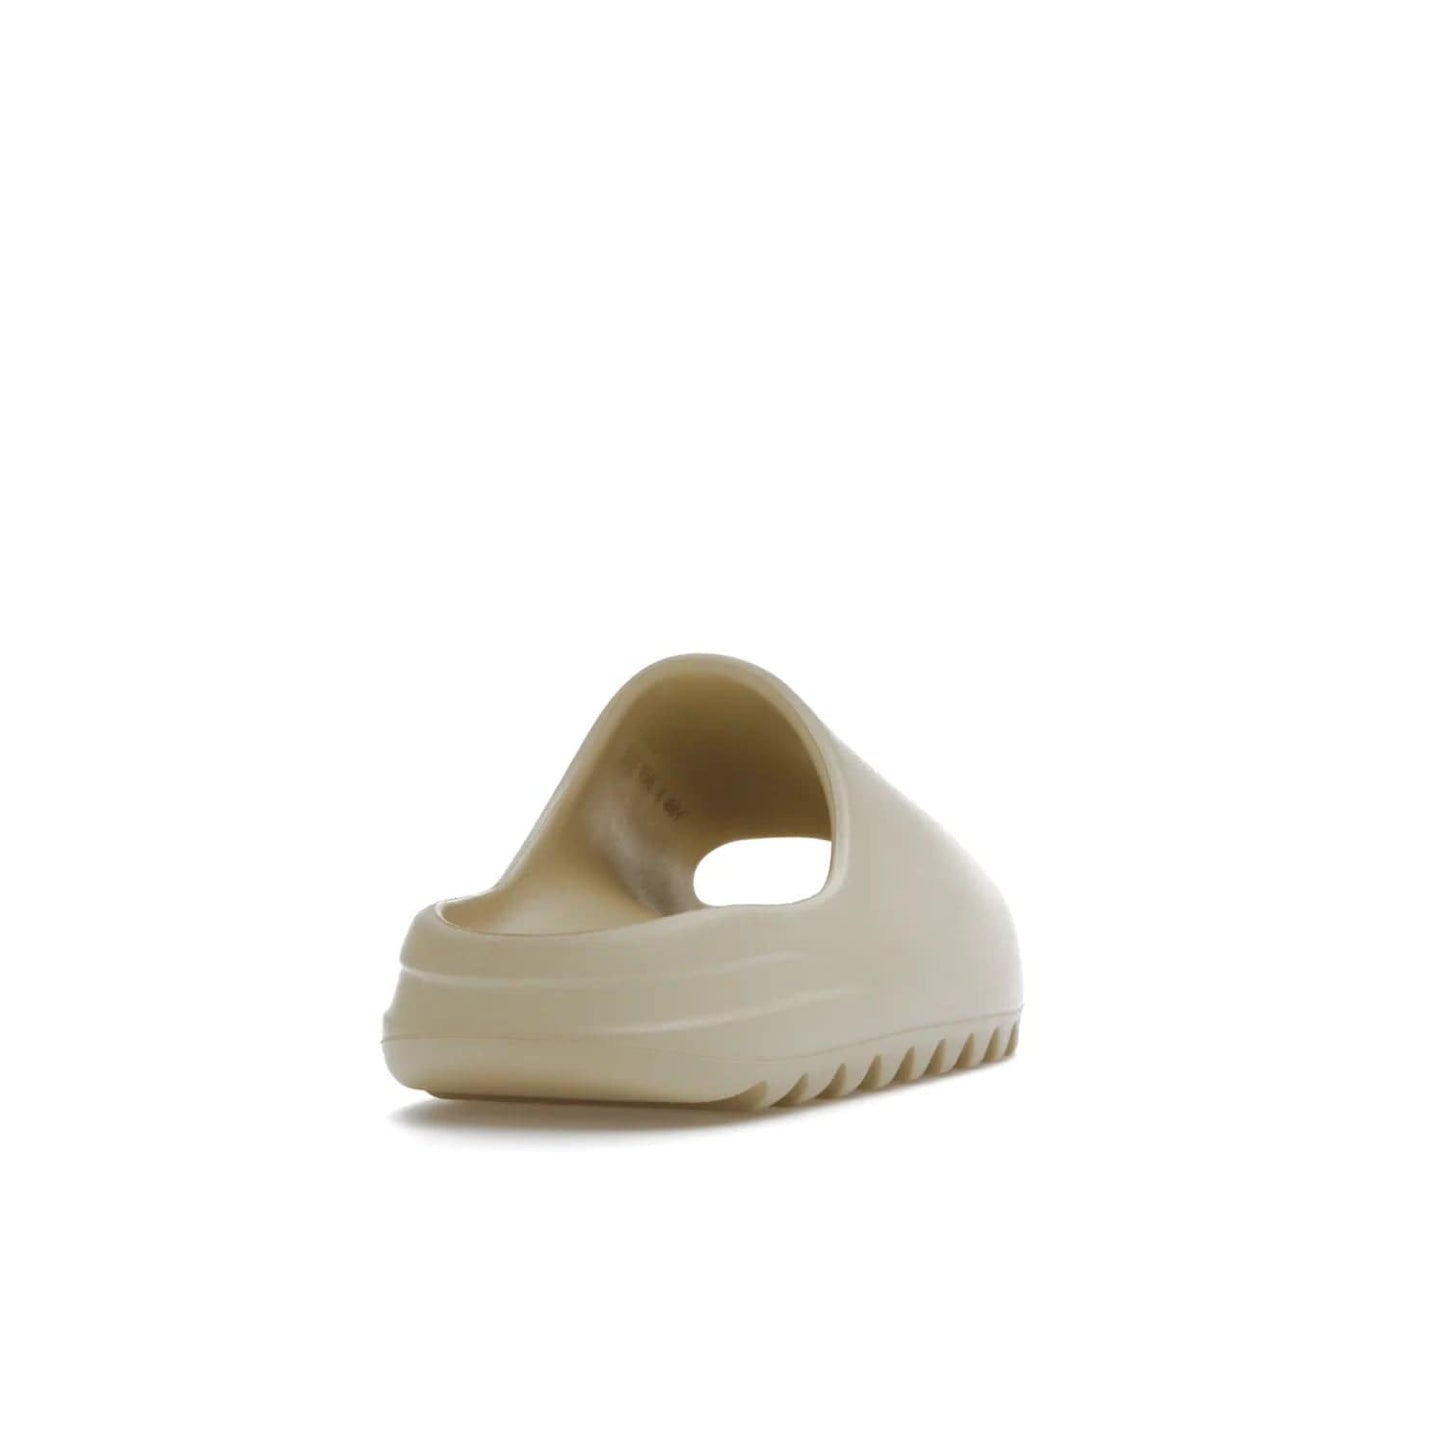 adidas Yeezy Slide Bone (2022 Restock) - Image 30 - Only at www.BallersClubKickz.com - Stay comfy with the adidas Yeezy Slide Bone - a fashionable silhouette with all-day comfort. This Bone/Bone/Bone colorway combines style and comfort with a pebbled texture and grooved sole. Restocked in May 2022, this shoe is the perfect addition to your collection.